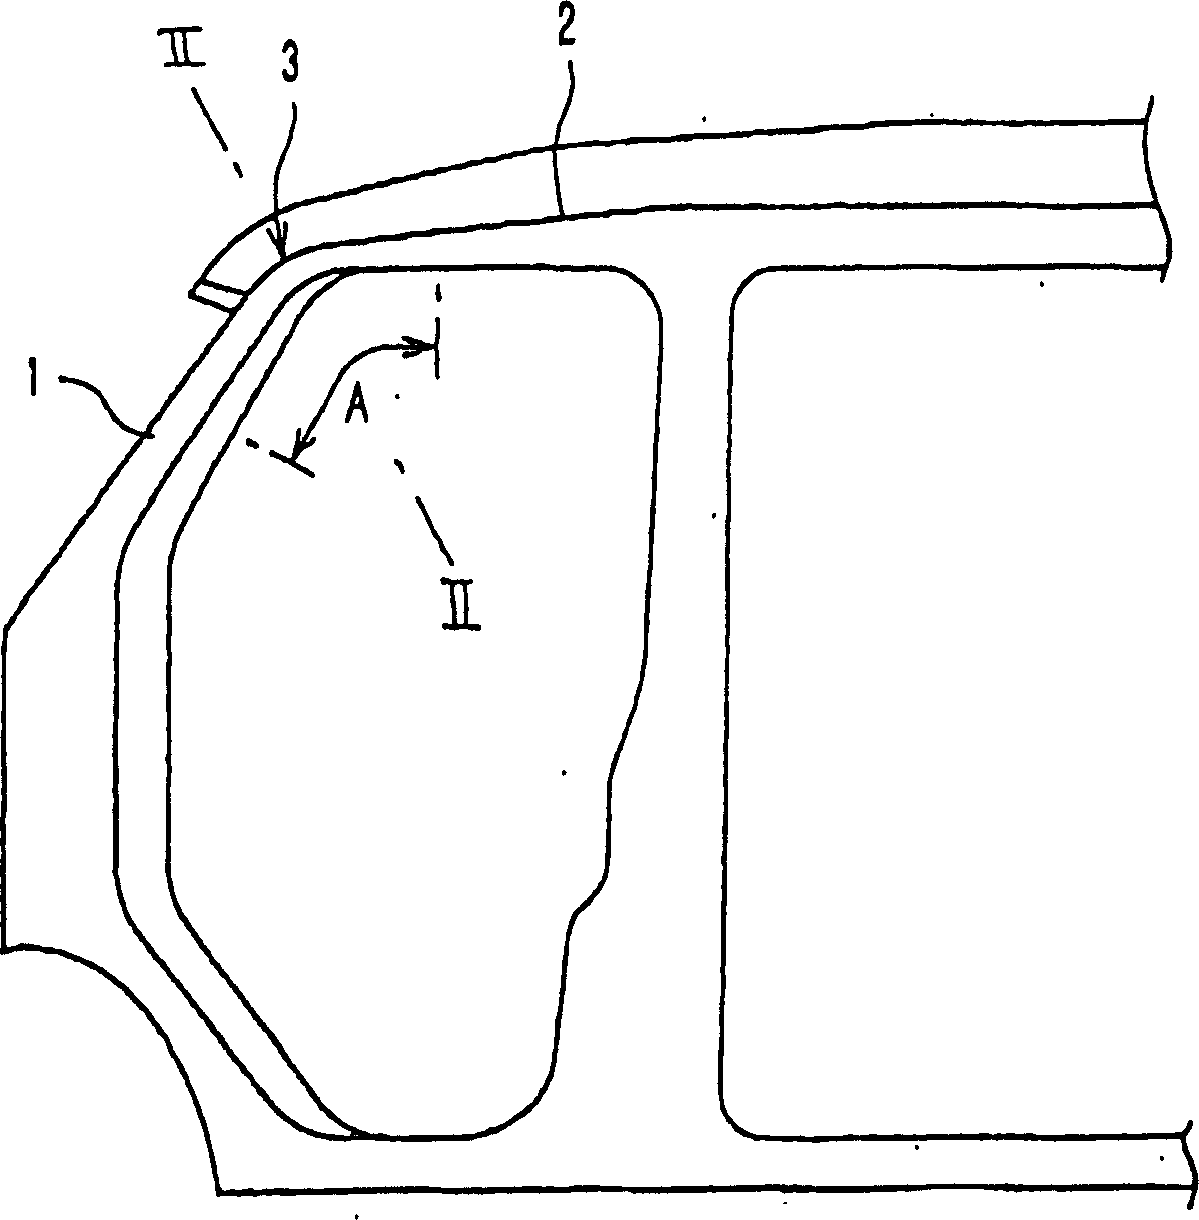 Carriage structure of car body